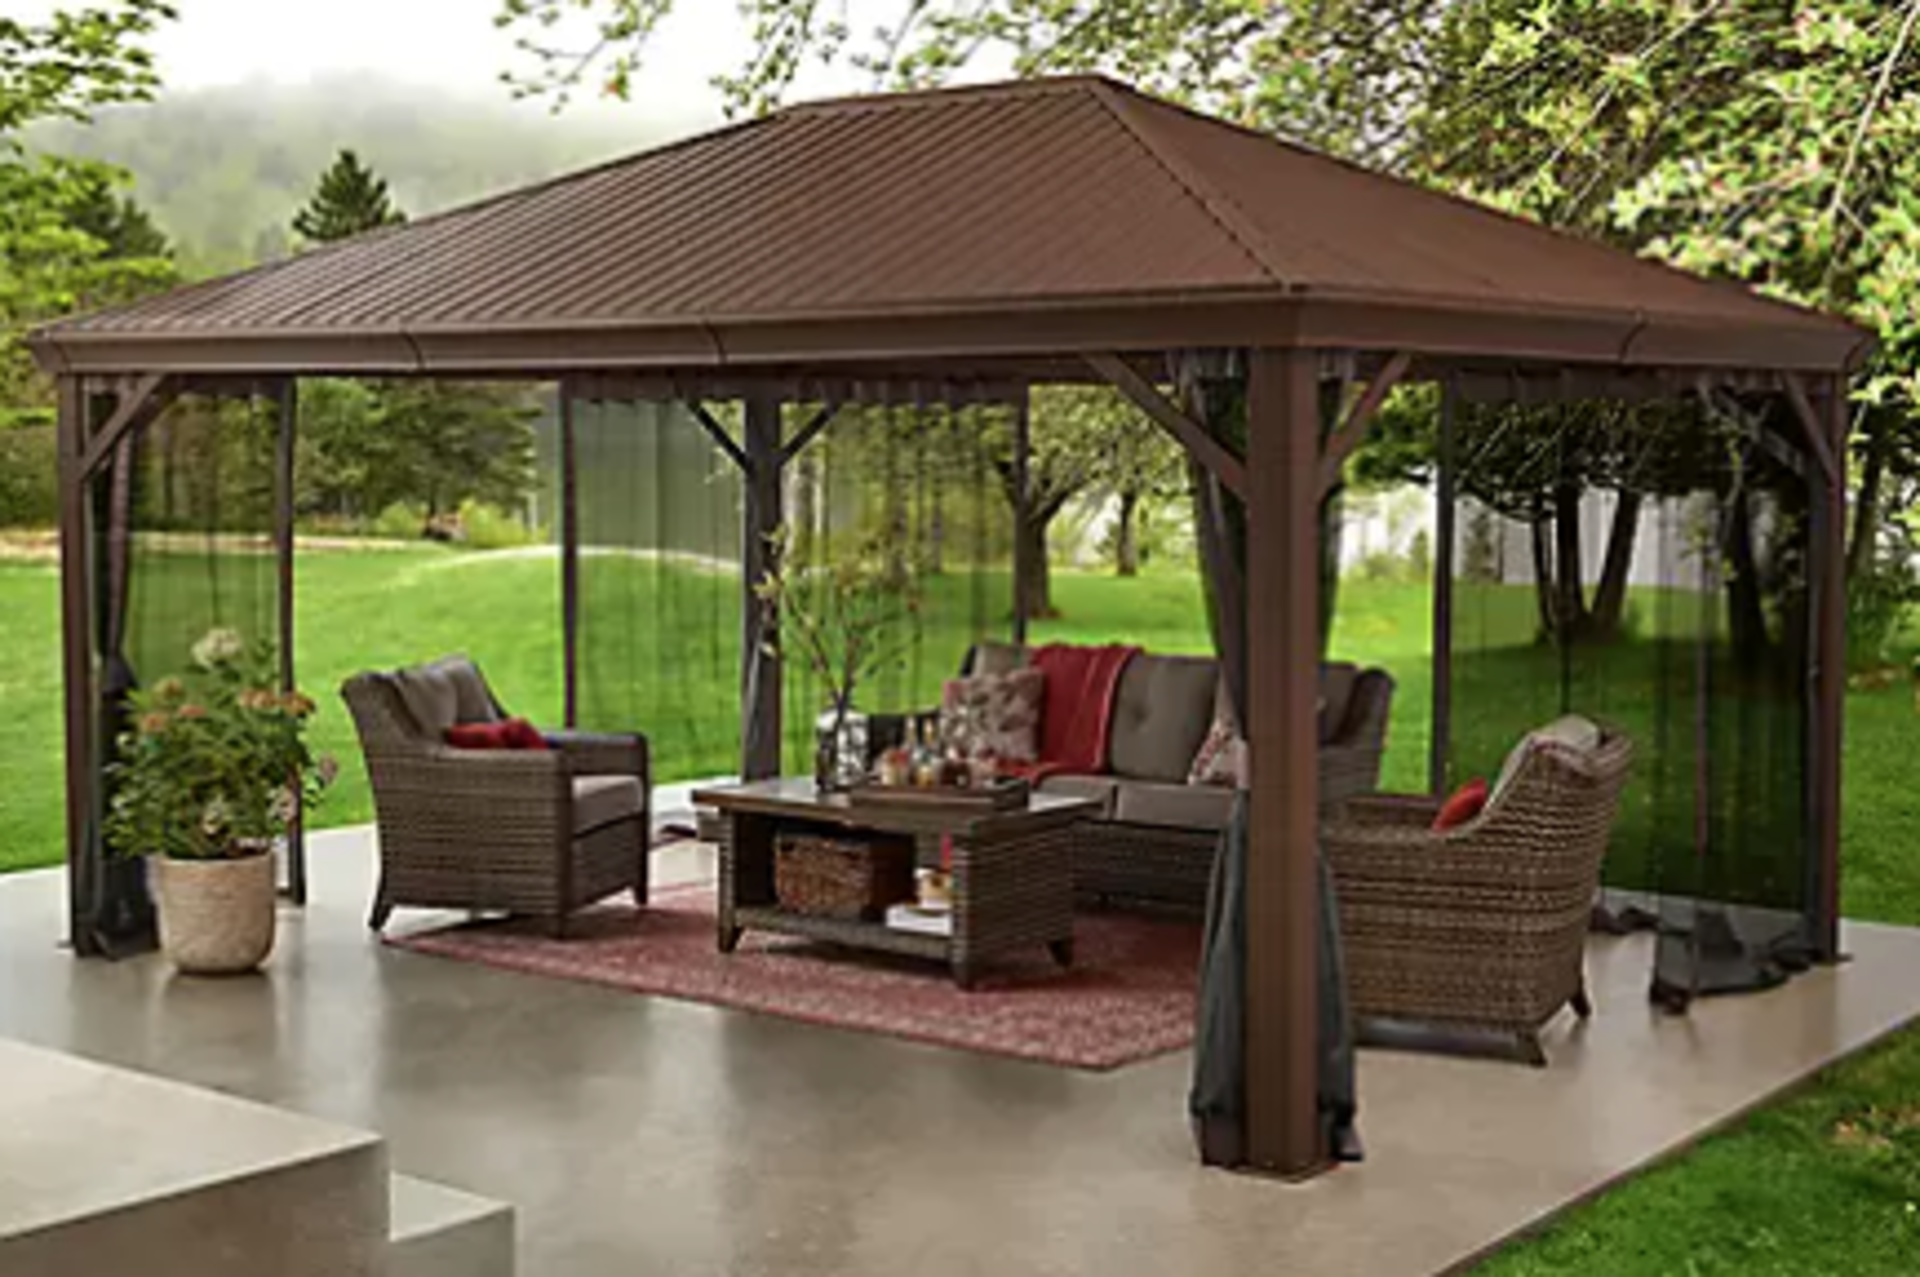 Gazebos, grill, AC, and more - Image 2 of 13